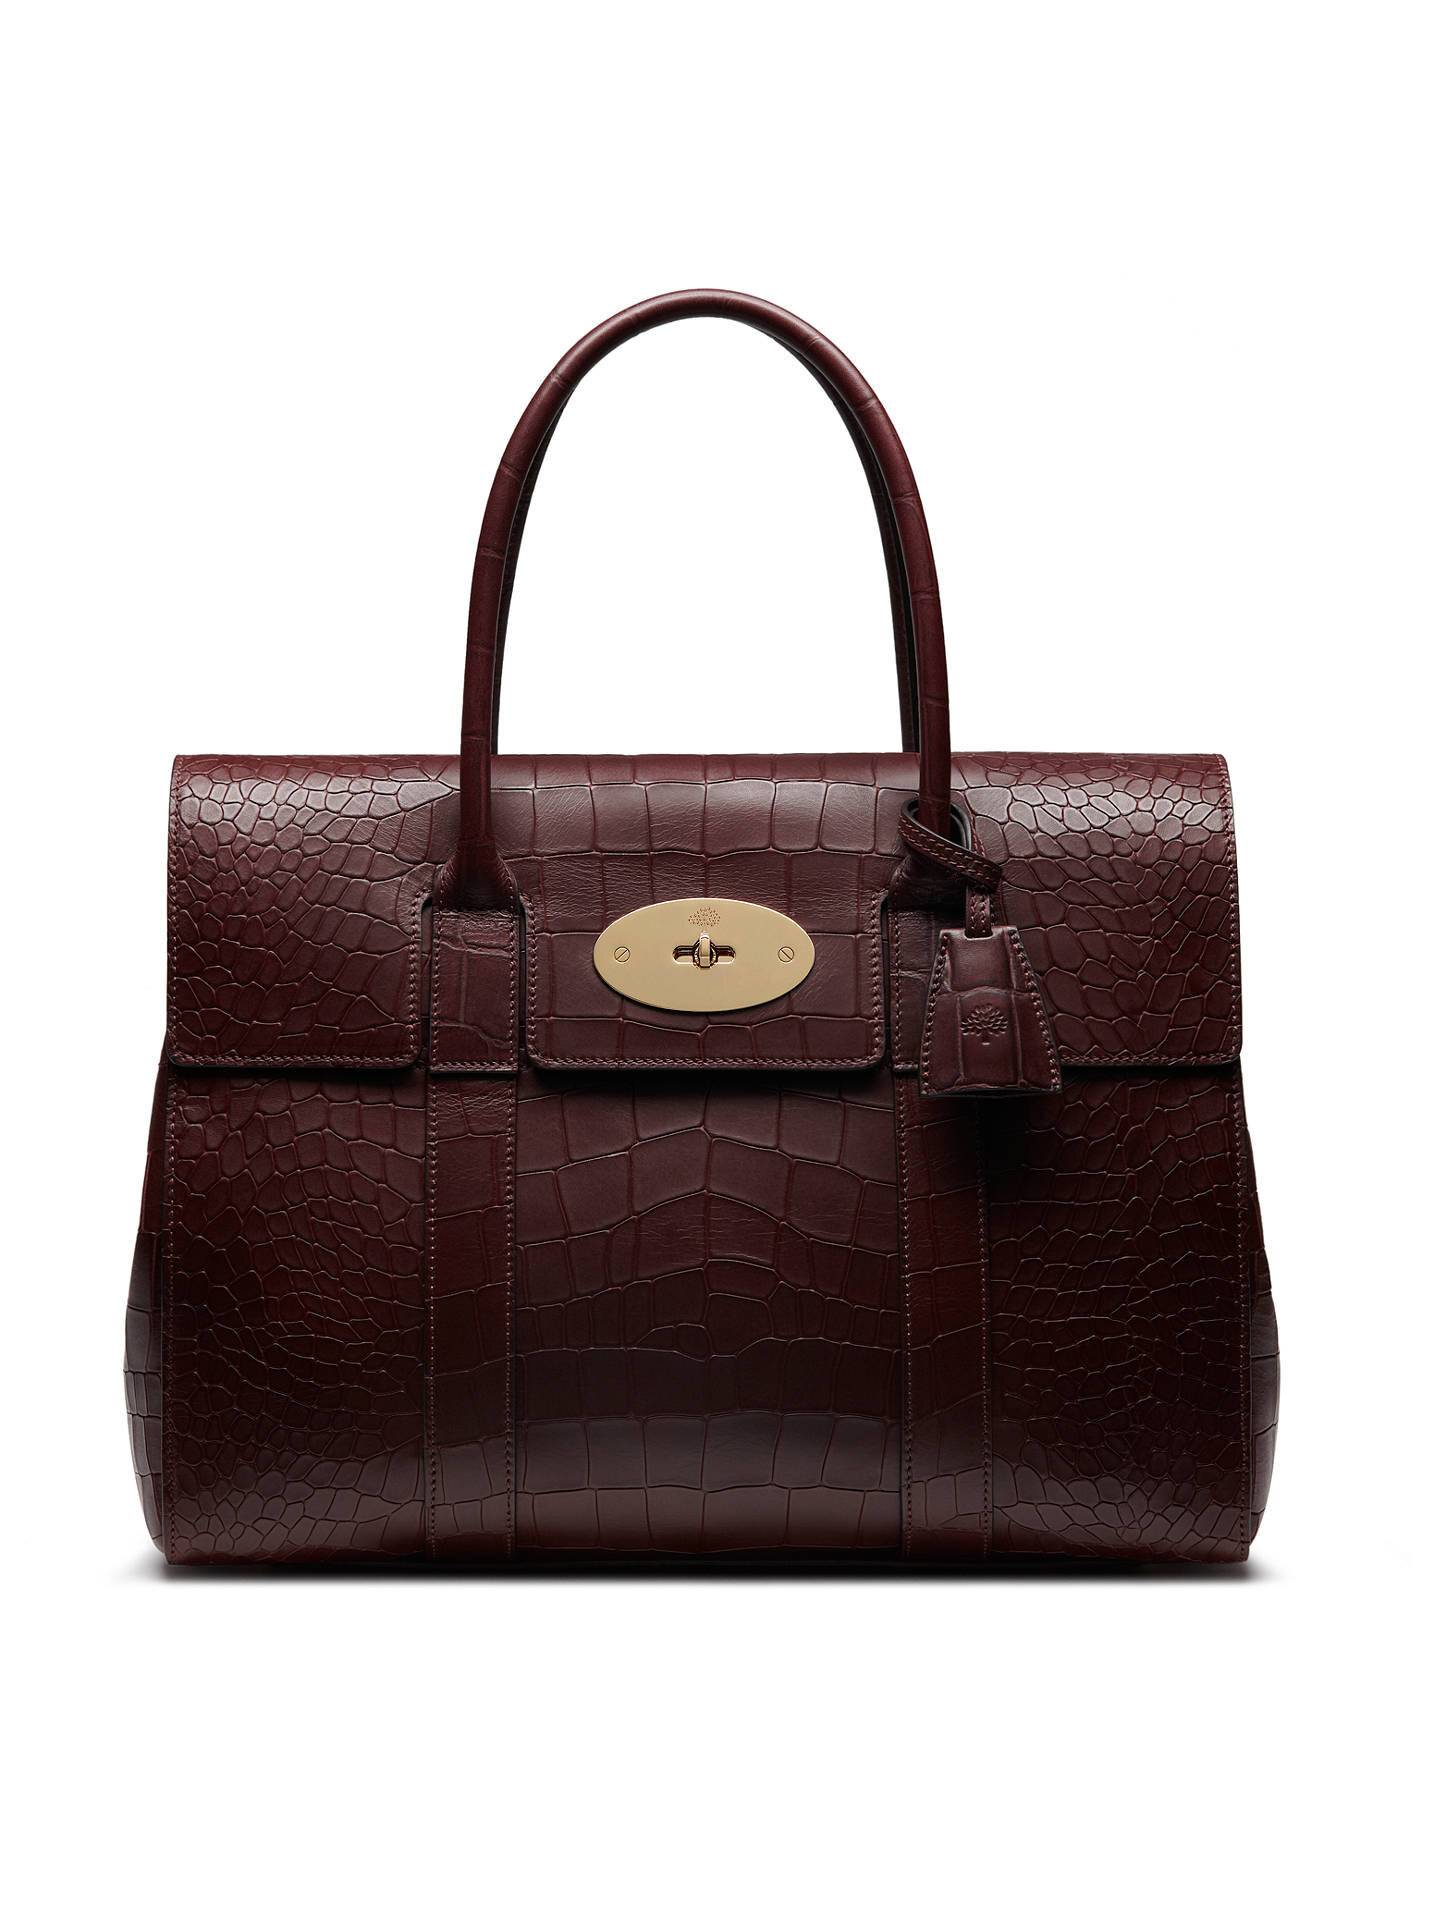 Mulberry Bayswater Tote in Oxblood Croc Print Leather — UFO No More